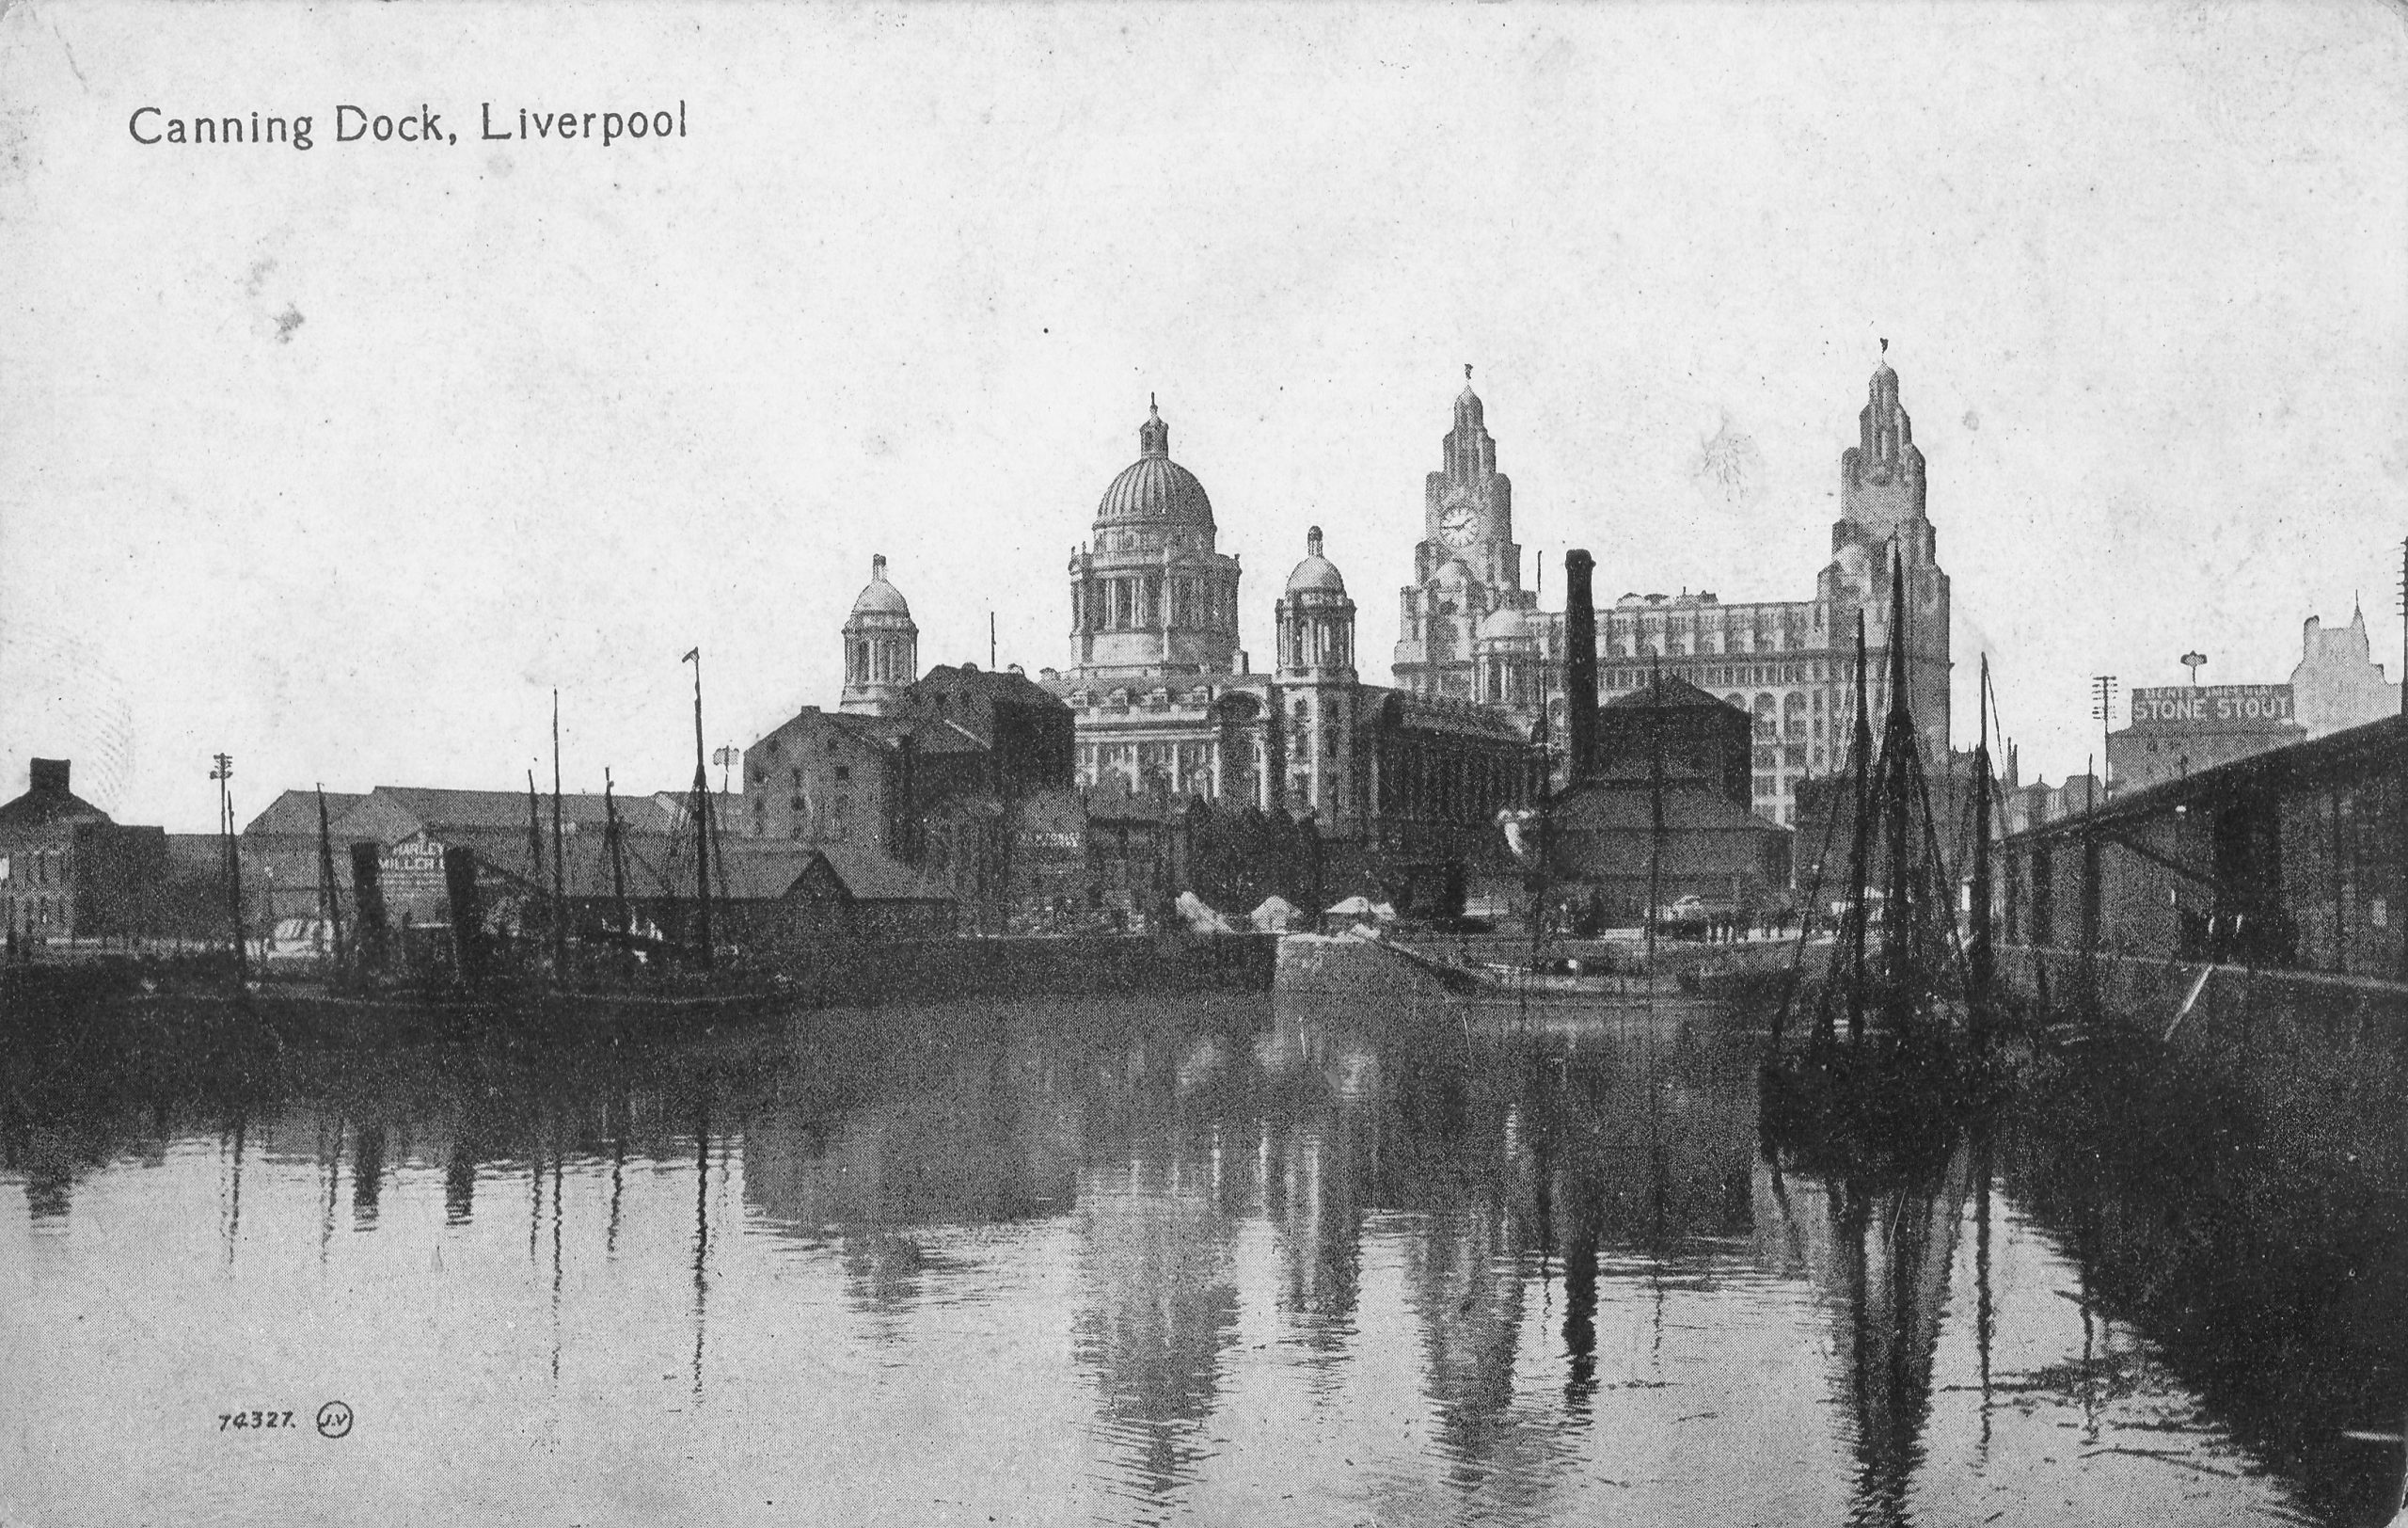 Photograph of Canning Dock and two Graces, looking north